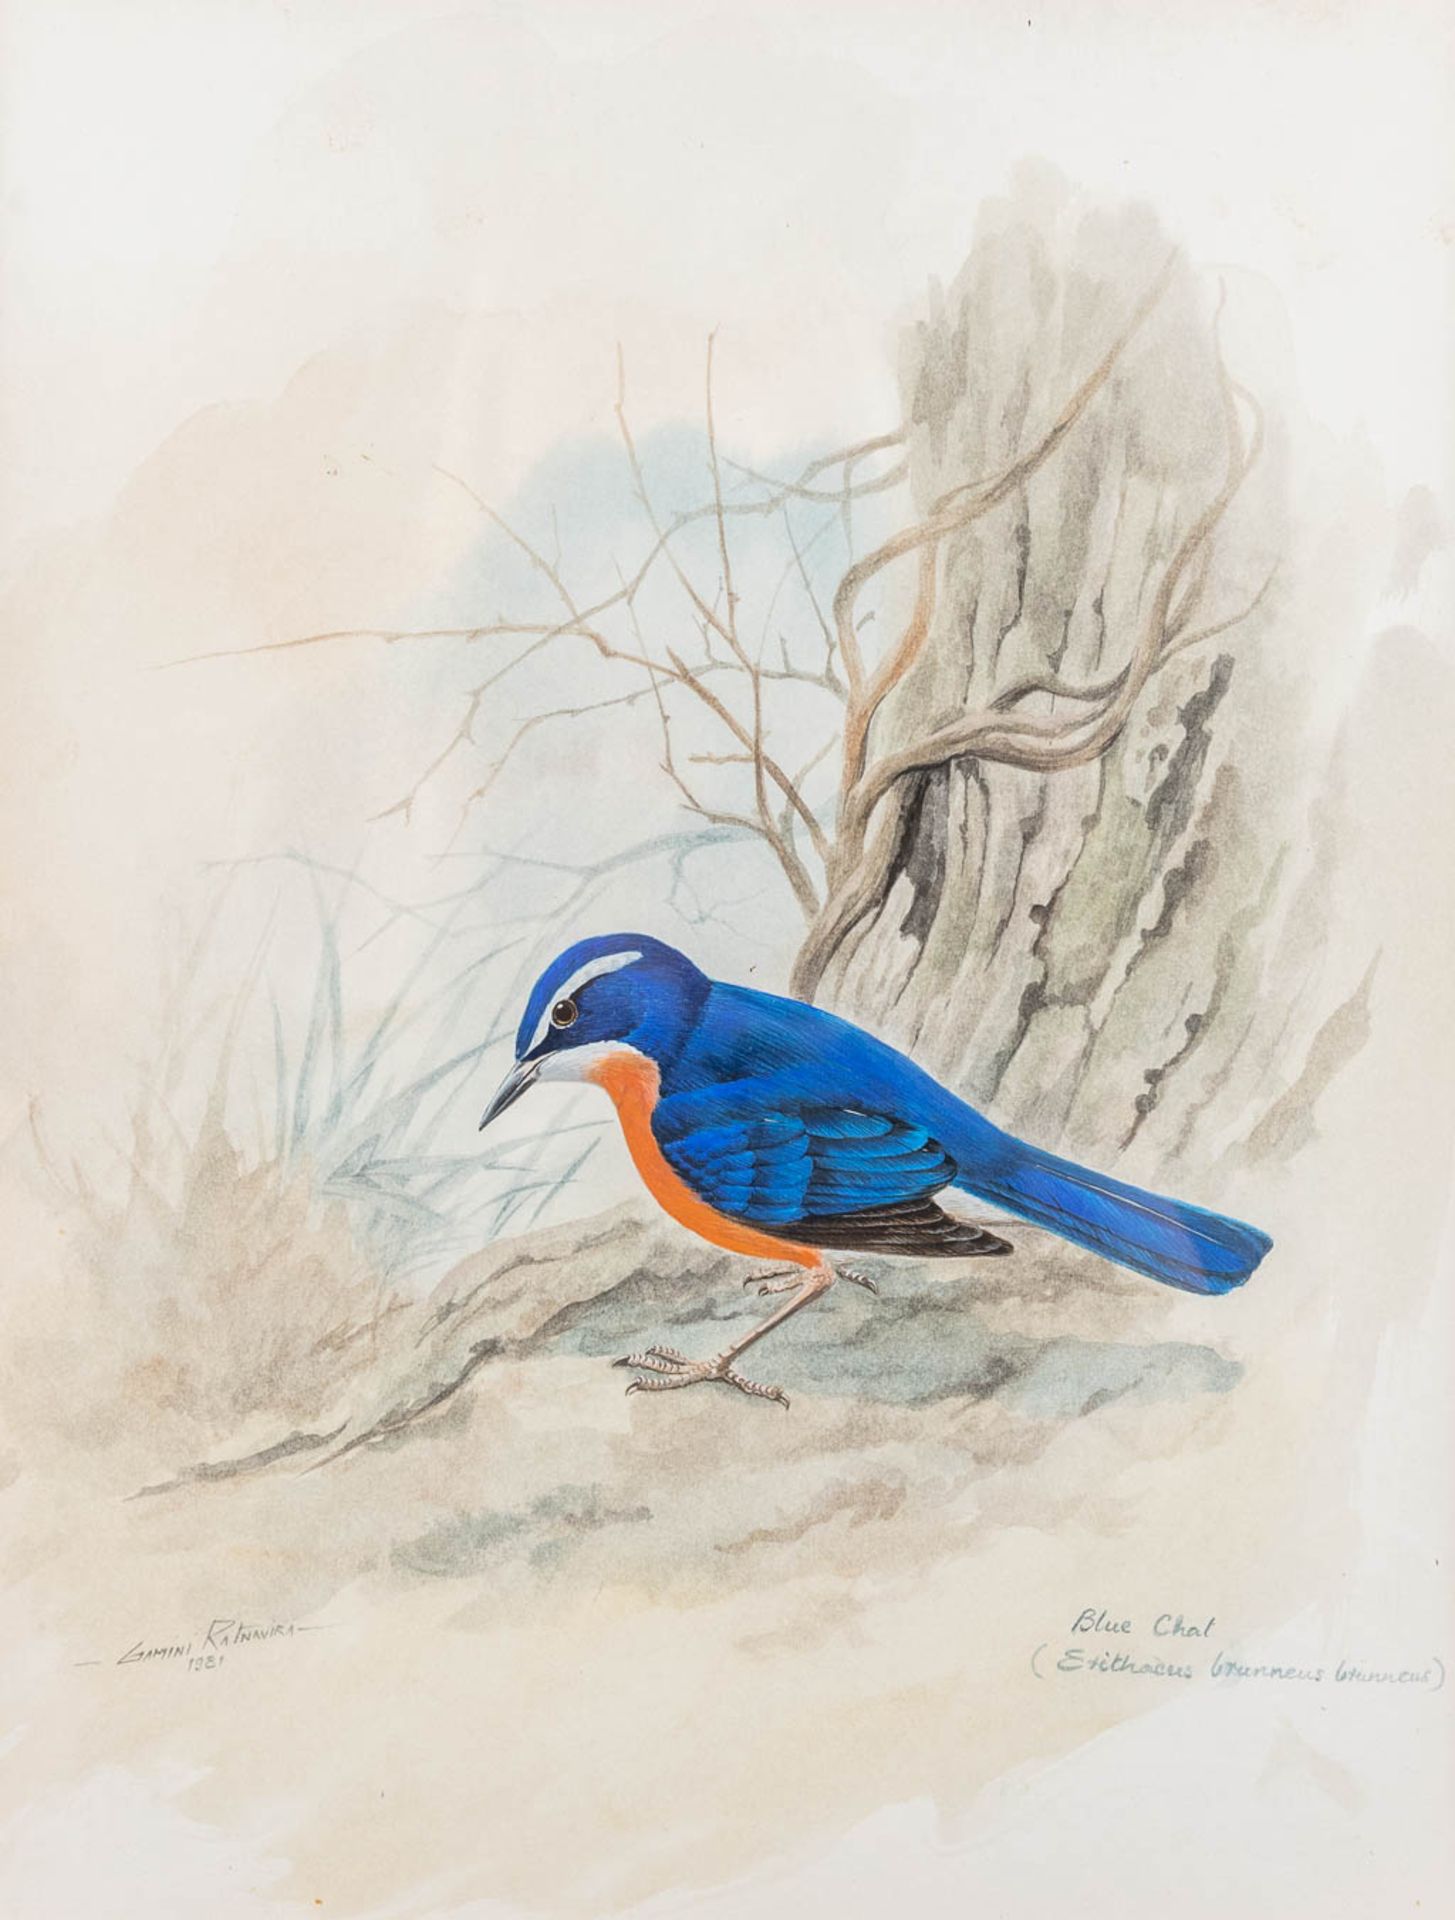 Gamini P. RATNAVIRA (1949) a collection of 4 drawings, watercolour on paper. (W: 26 x H: 34 cm) - Image 15 of 24